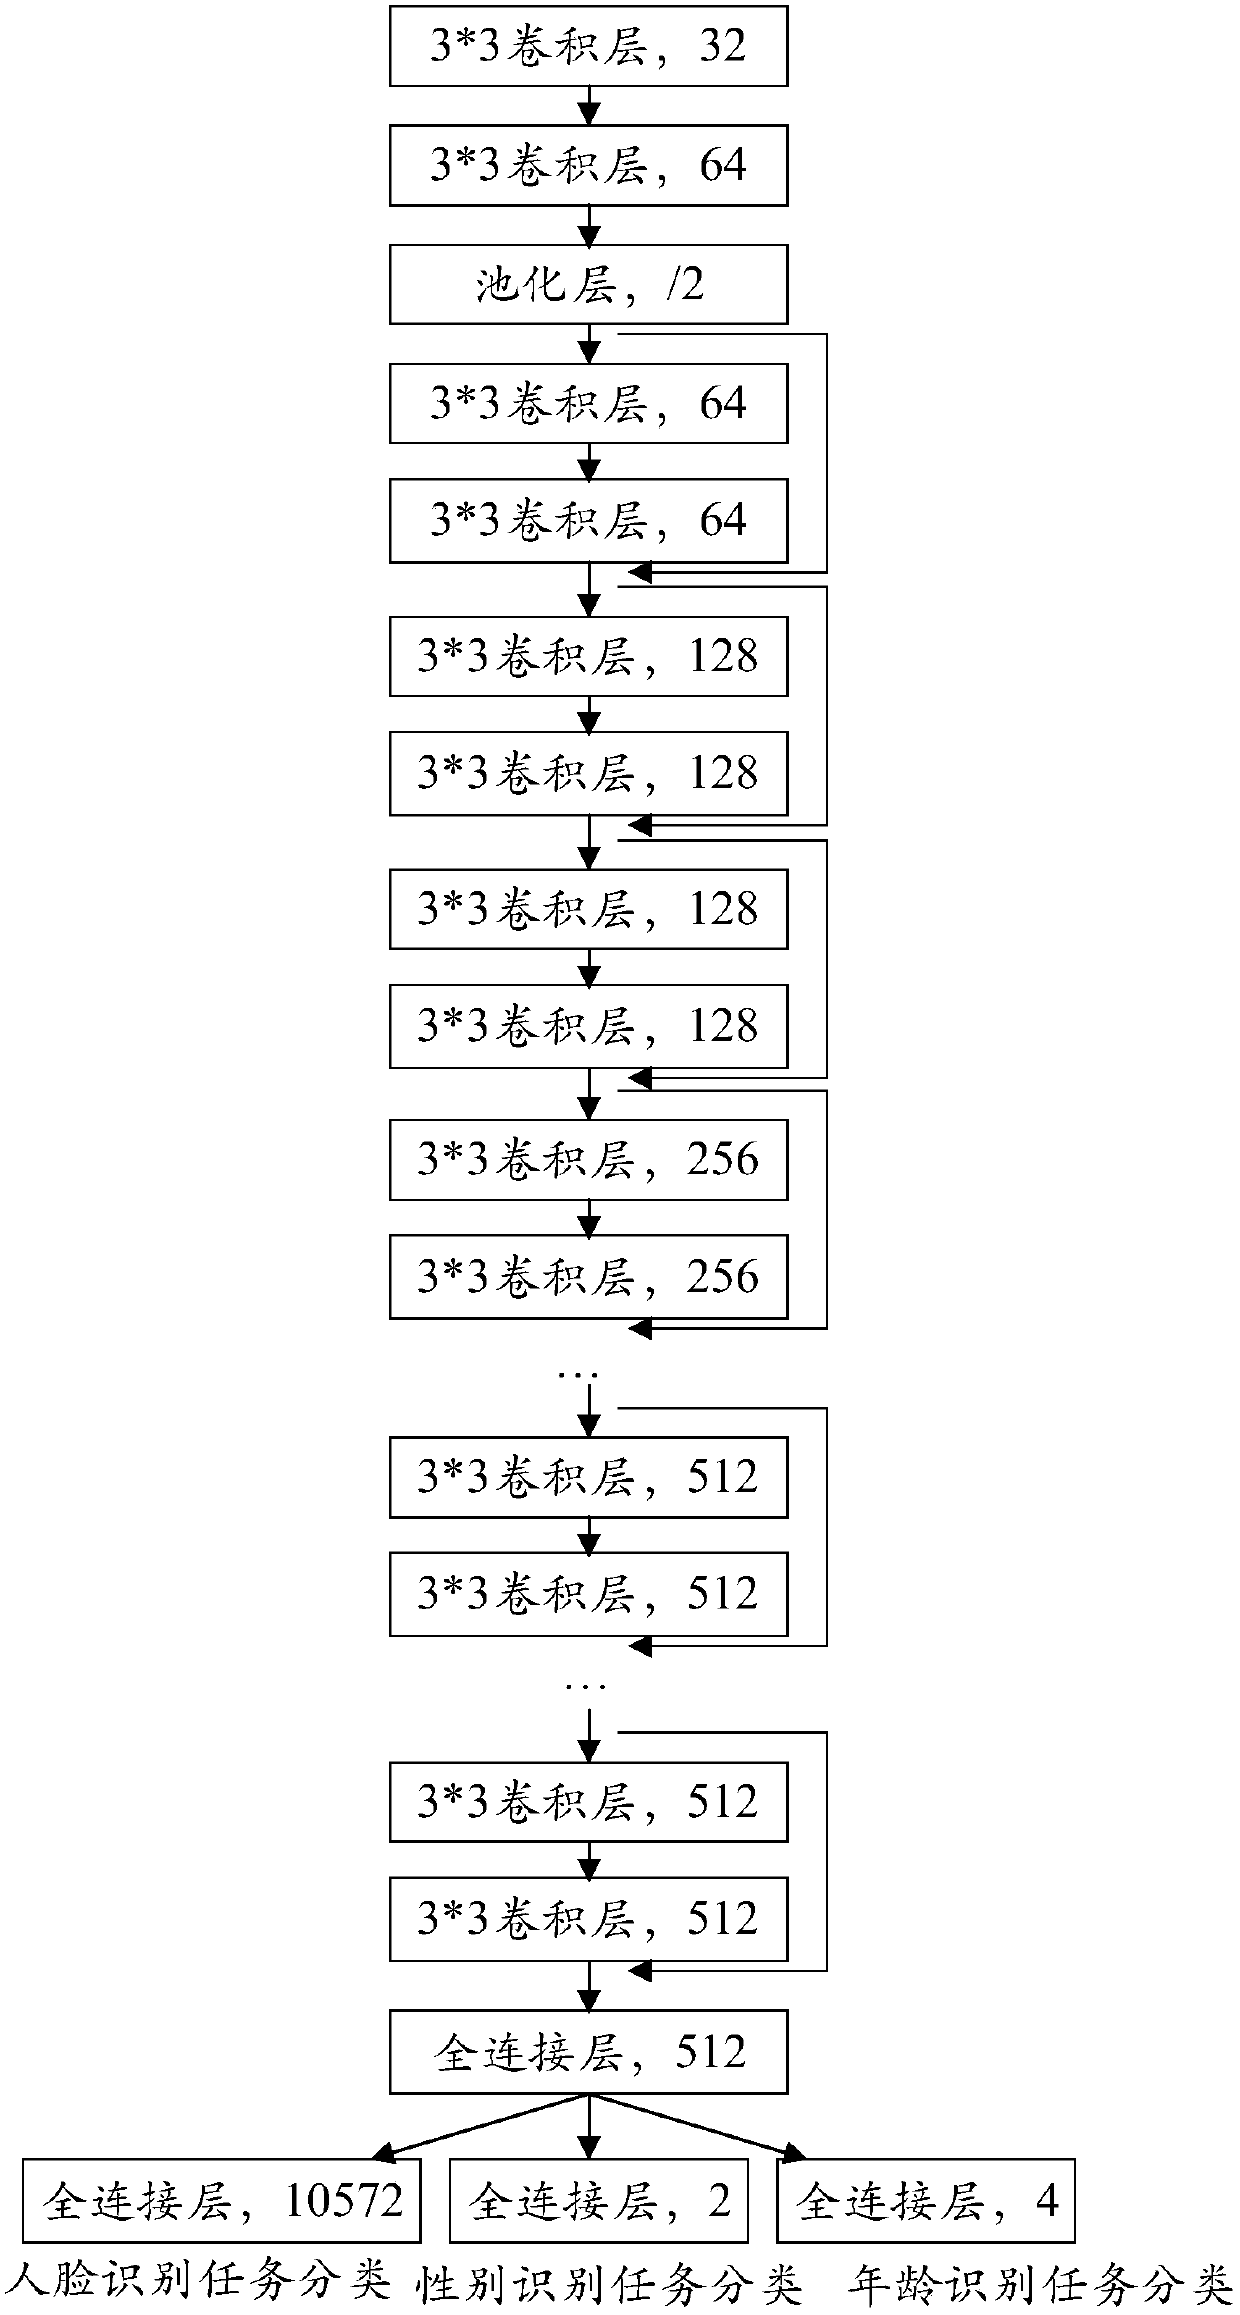 Human face identification method and apparatus, computer equipment and readable storage medium